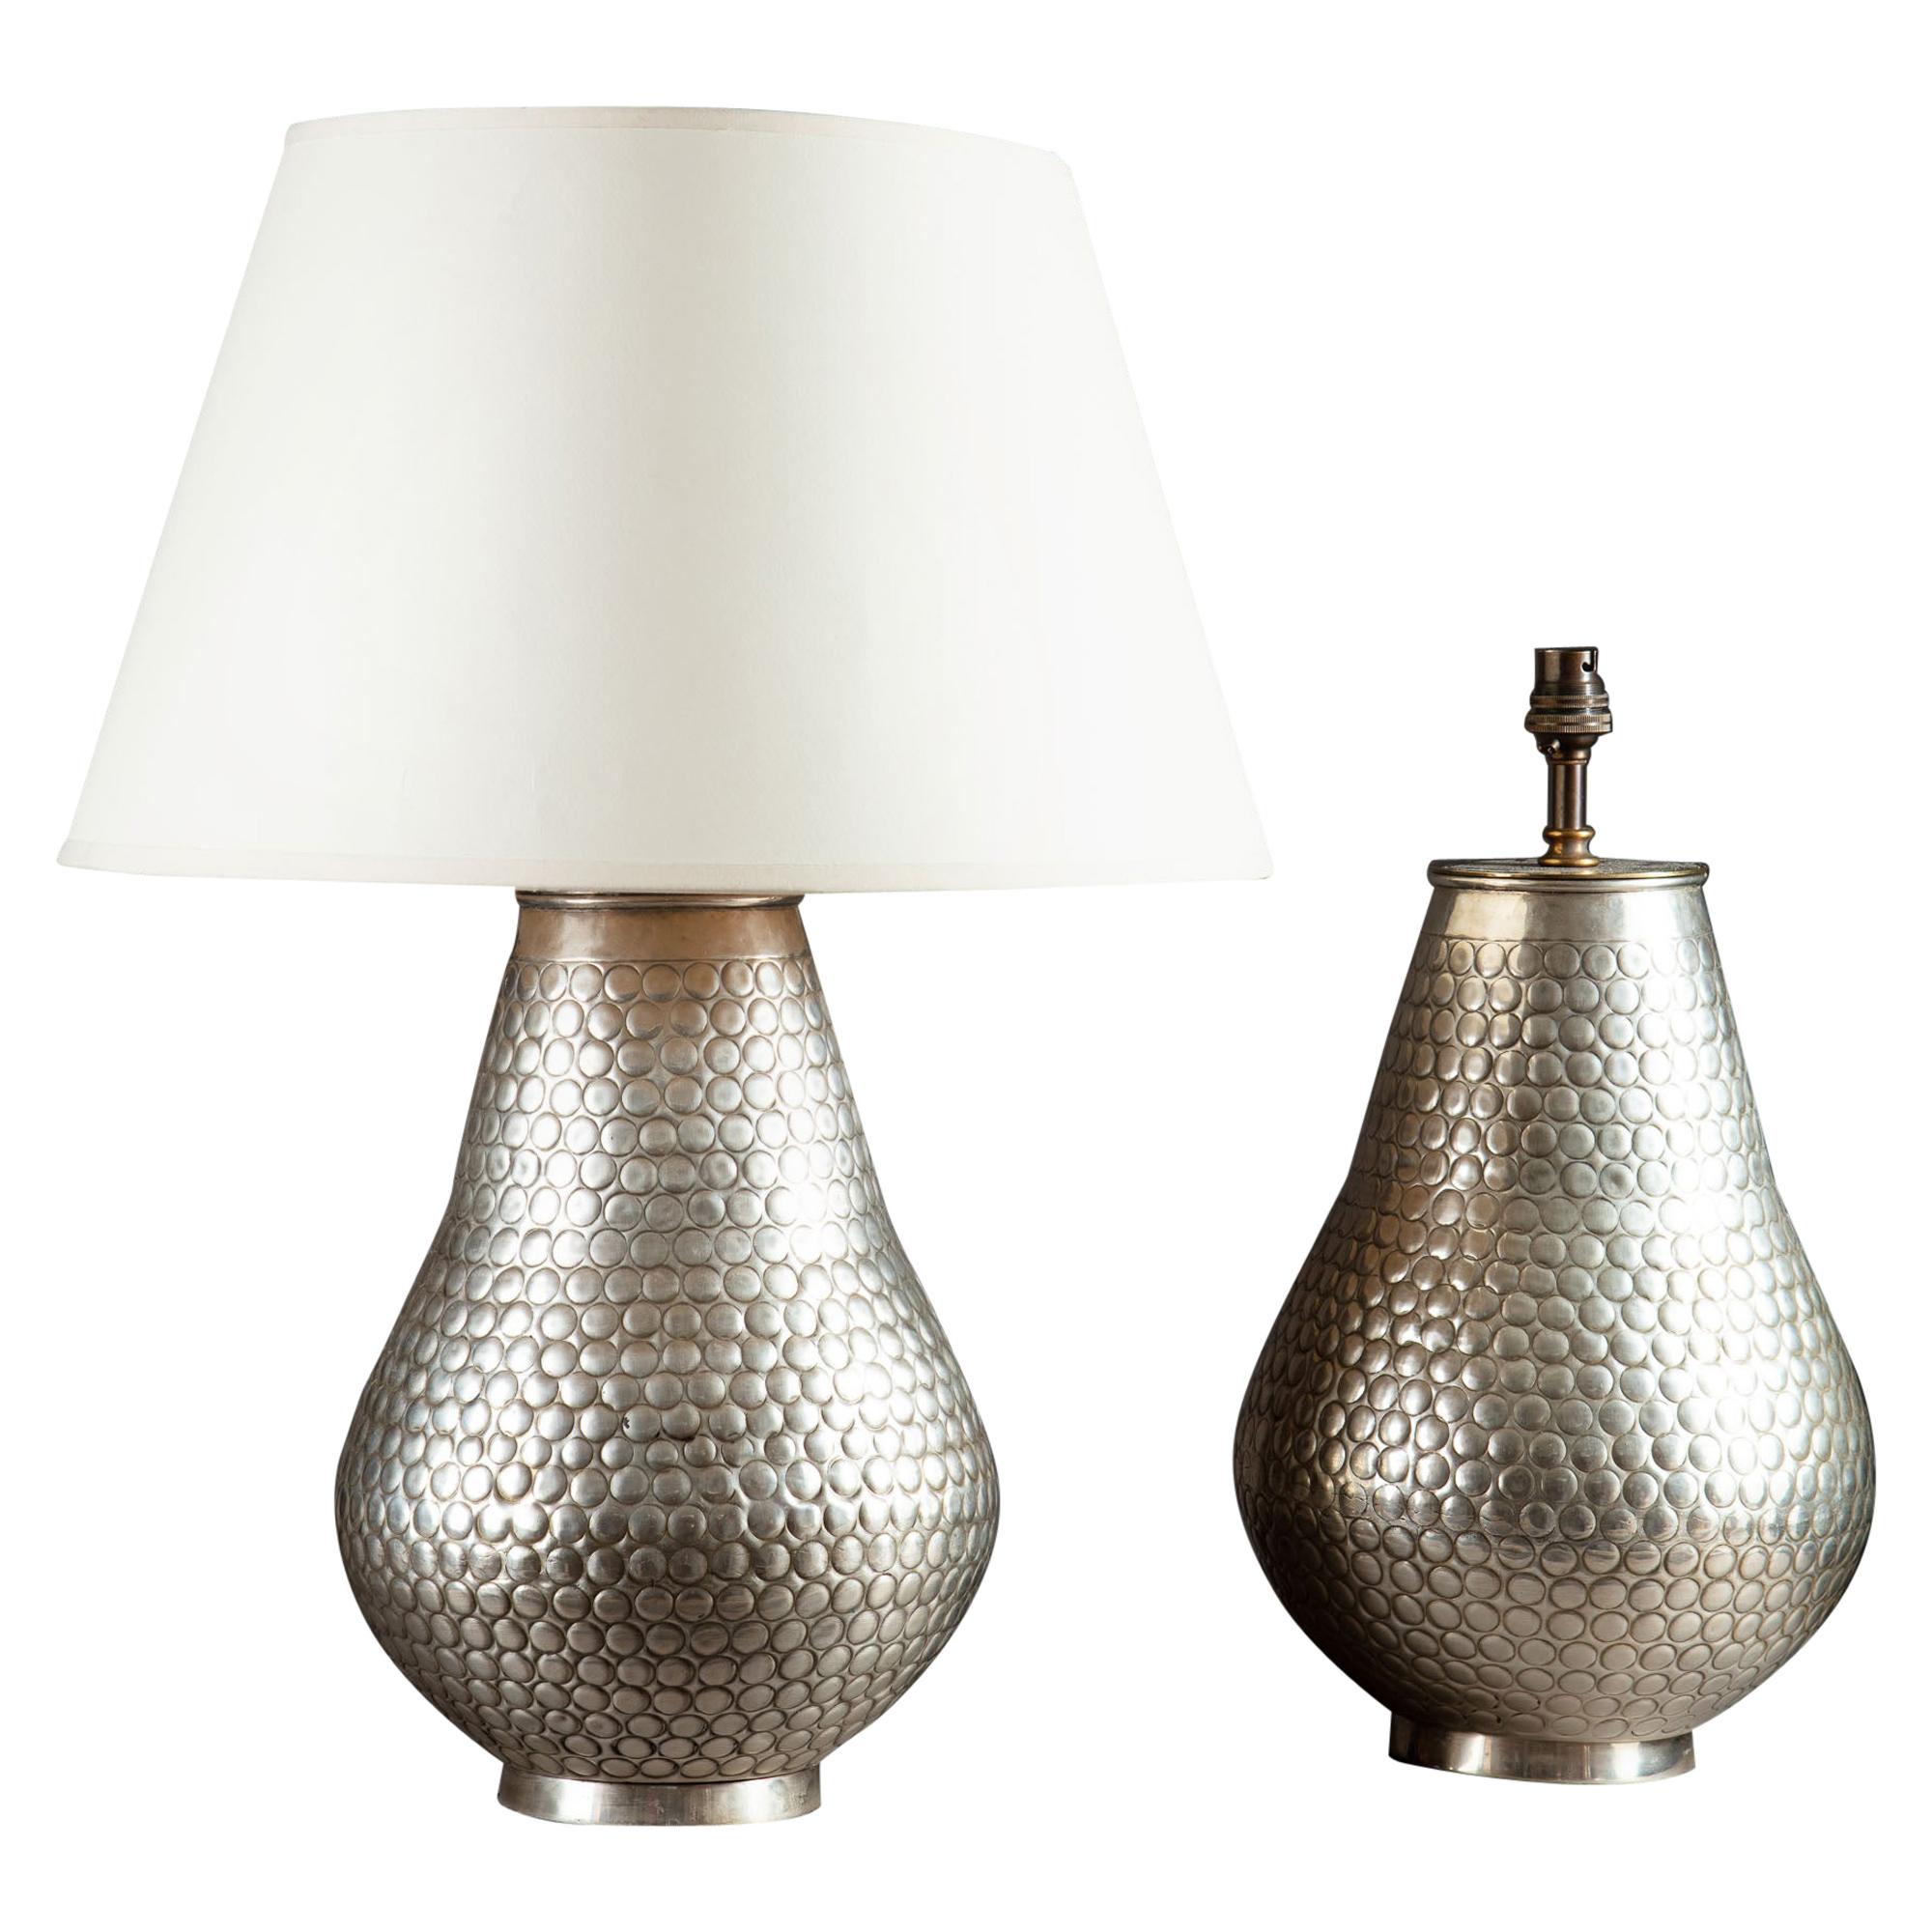 Pair of Silvered Punched Metal Vases as Table Lamps For Sale